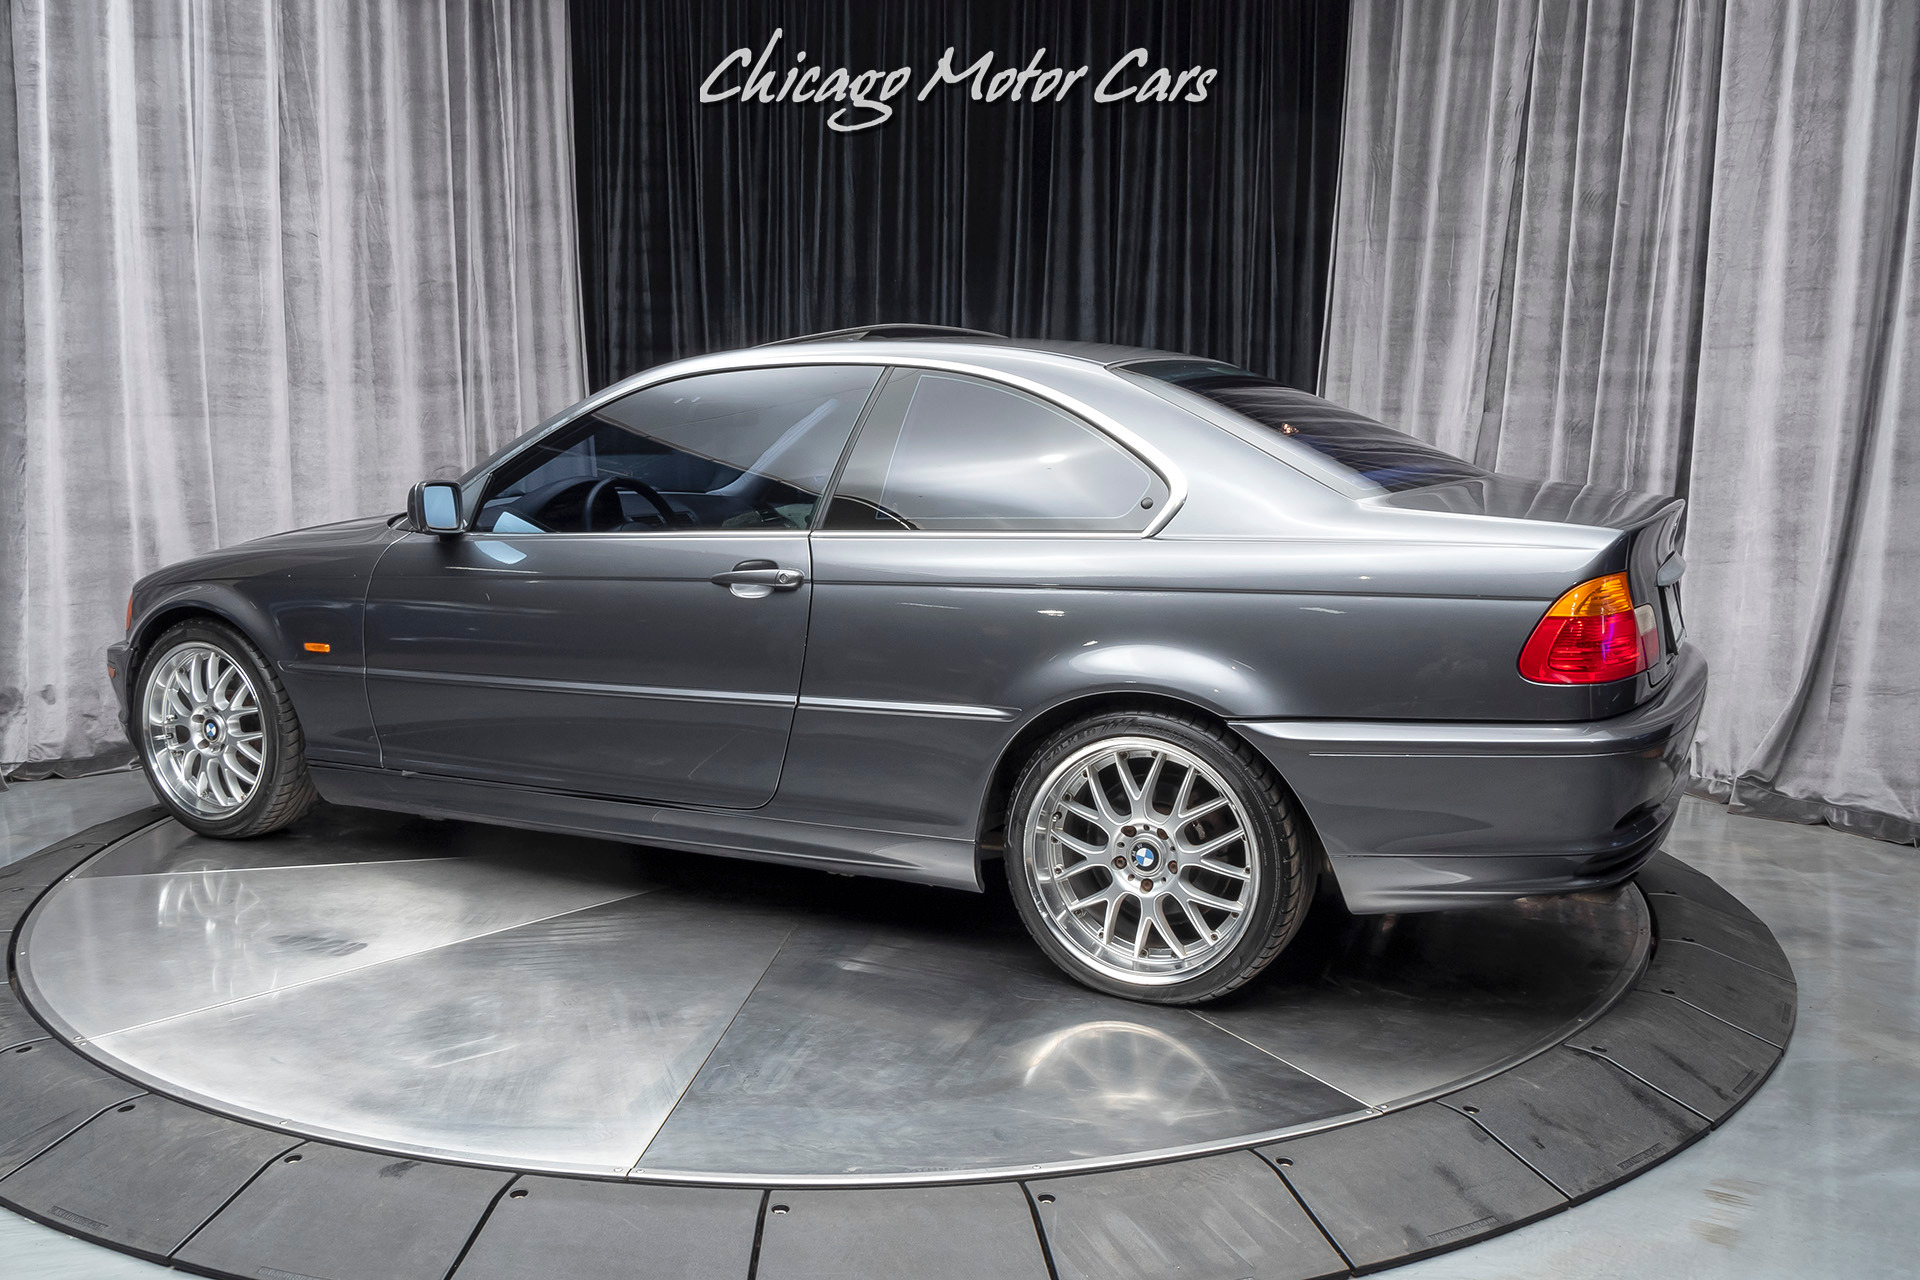 Used-2000-BMW-323Ci-Coupe-MSRP-35K-VERY-WELL-EQUIPPED